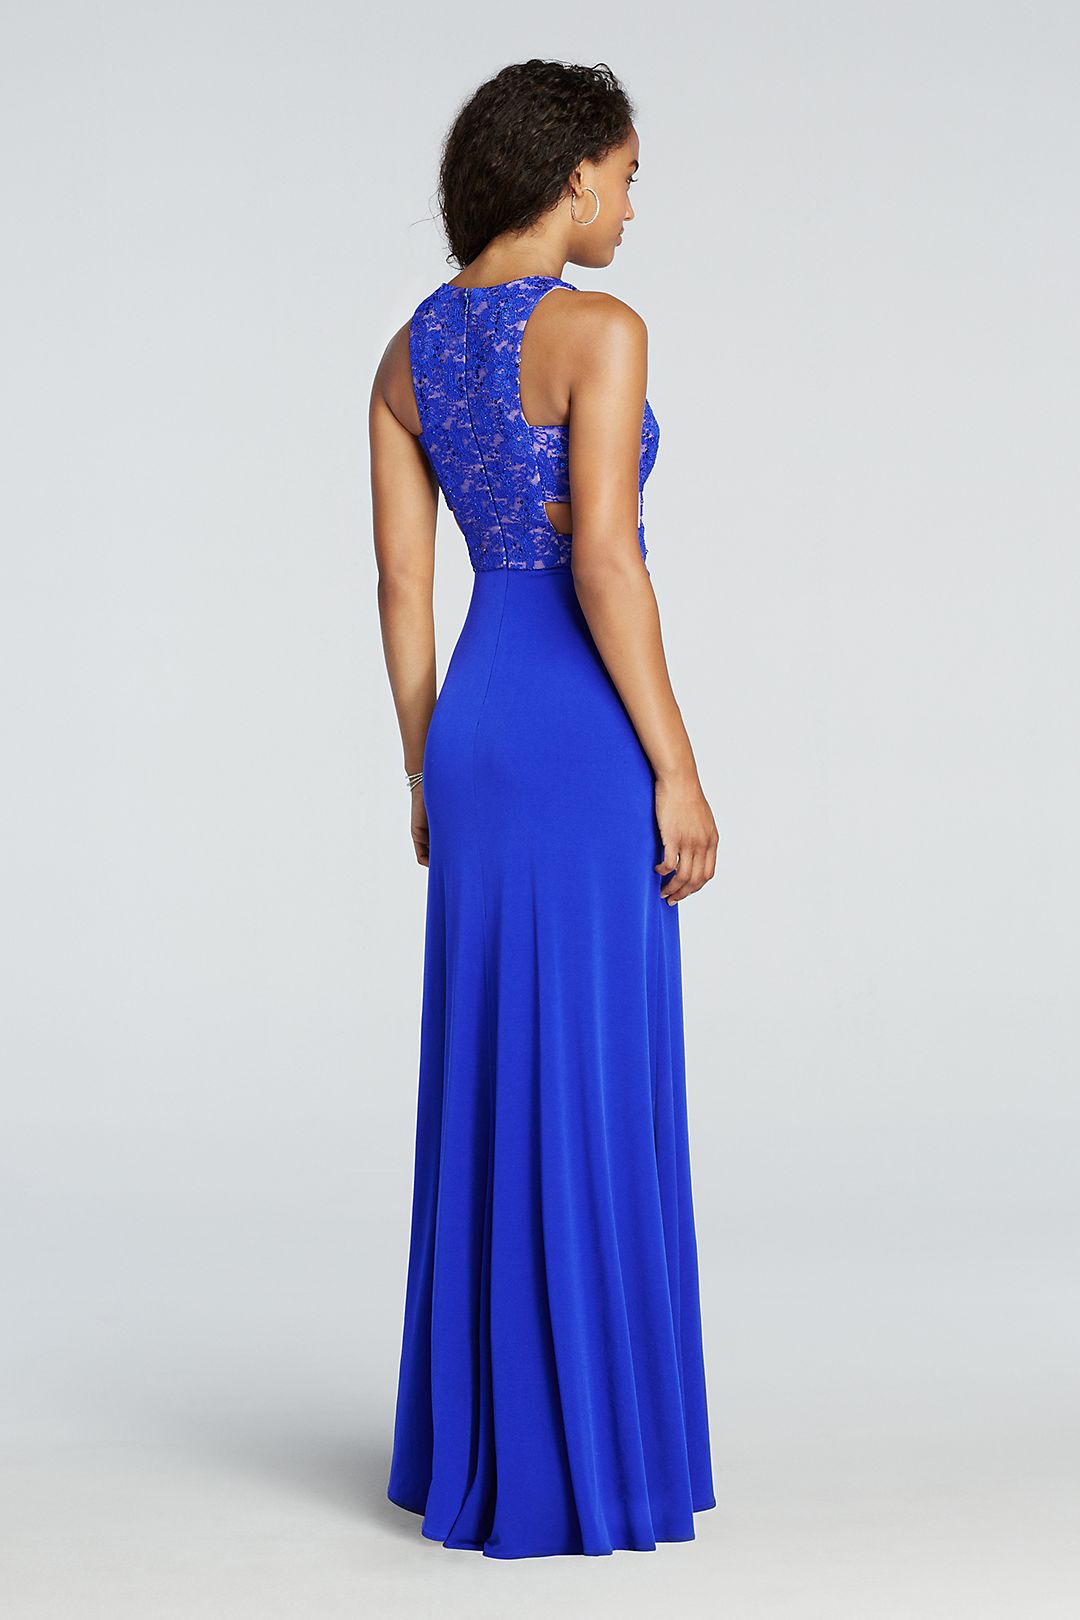 High Neck Sequin Lace Prom Dress with Cut Outs Image 4